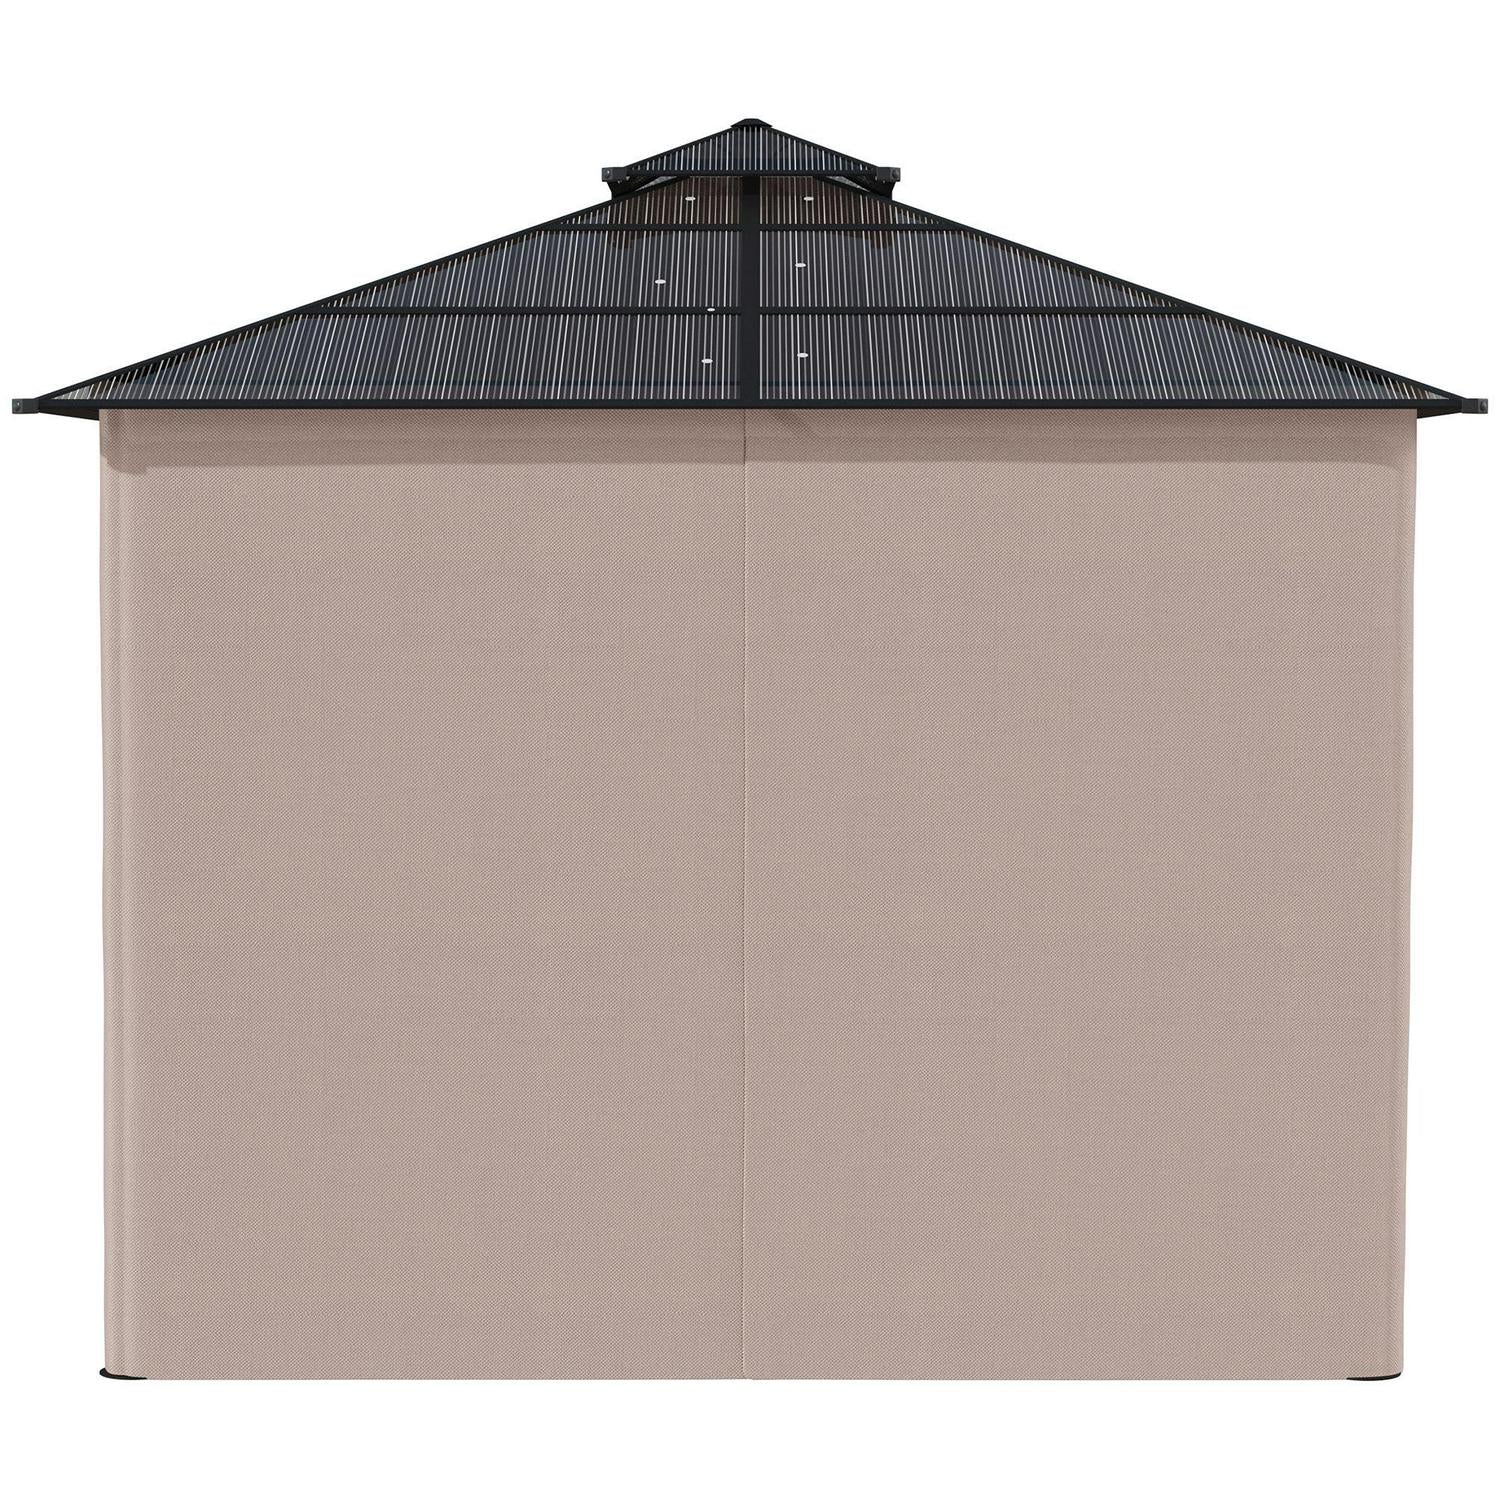 Double Roof Hard Top With Galvanized Steel Frame